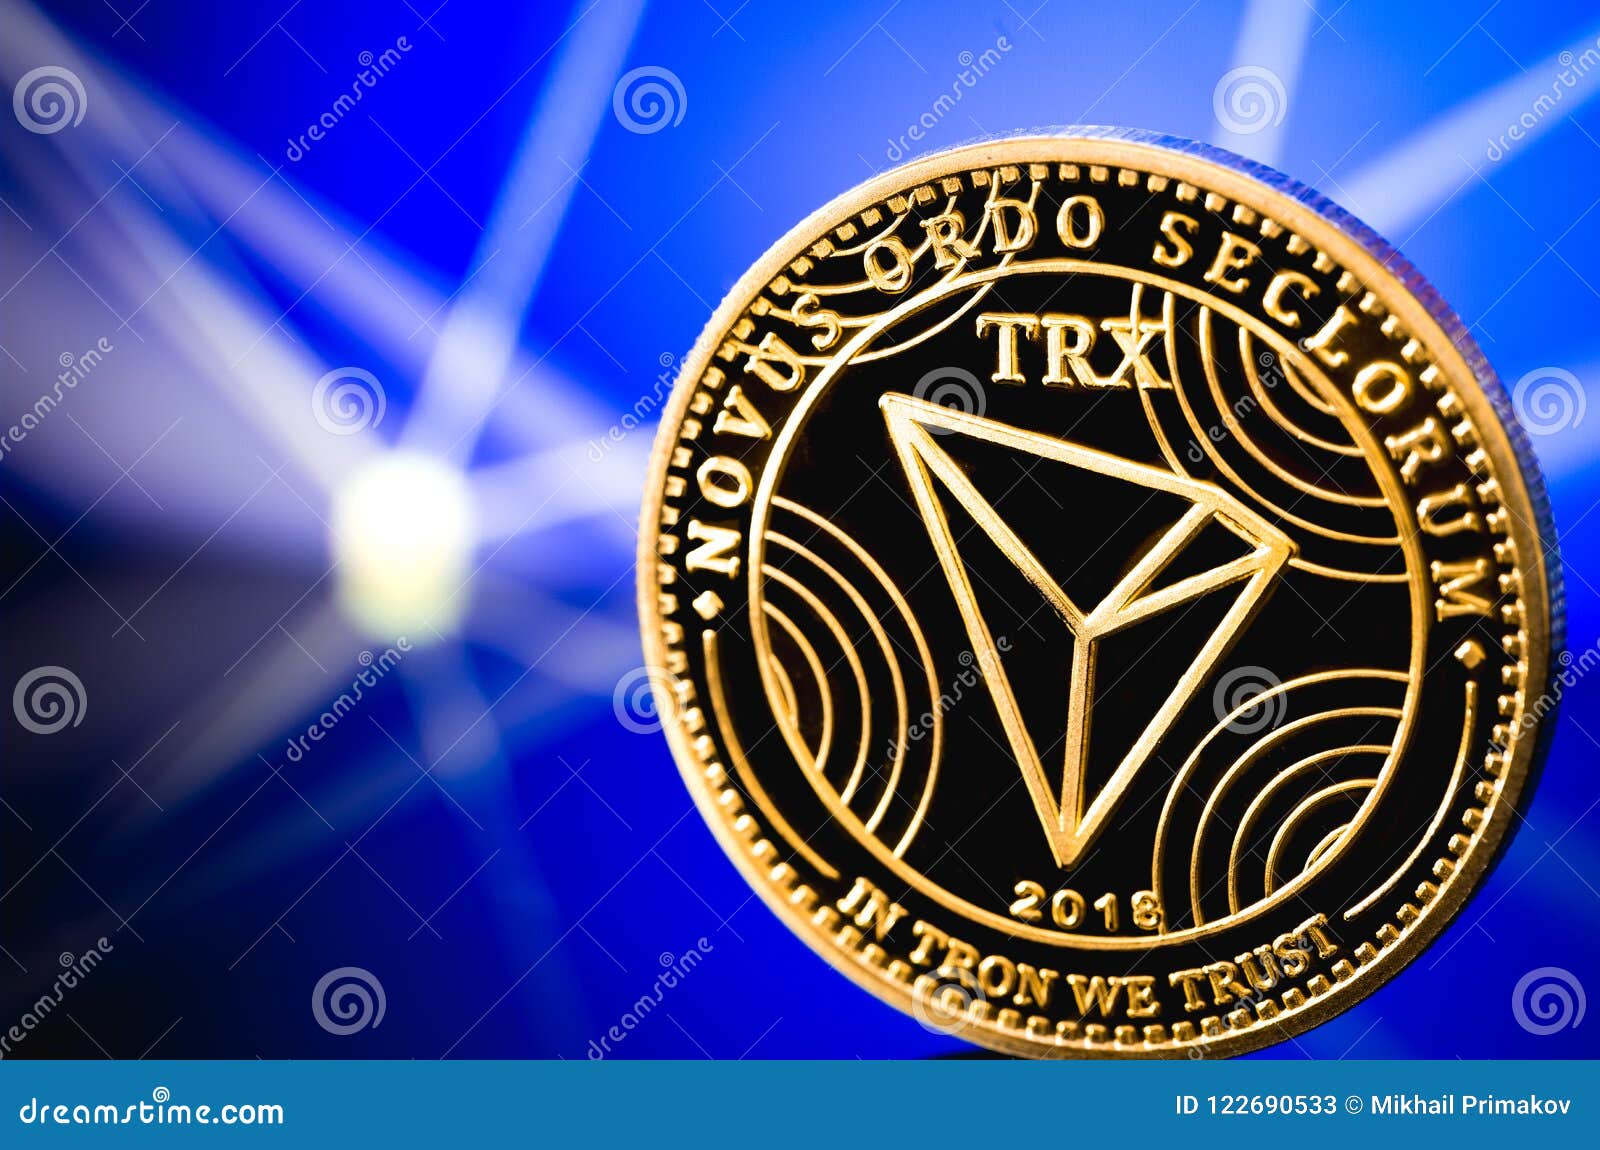 Tron coin cryptocurrency stock image. Image of exchange ...